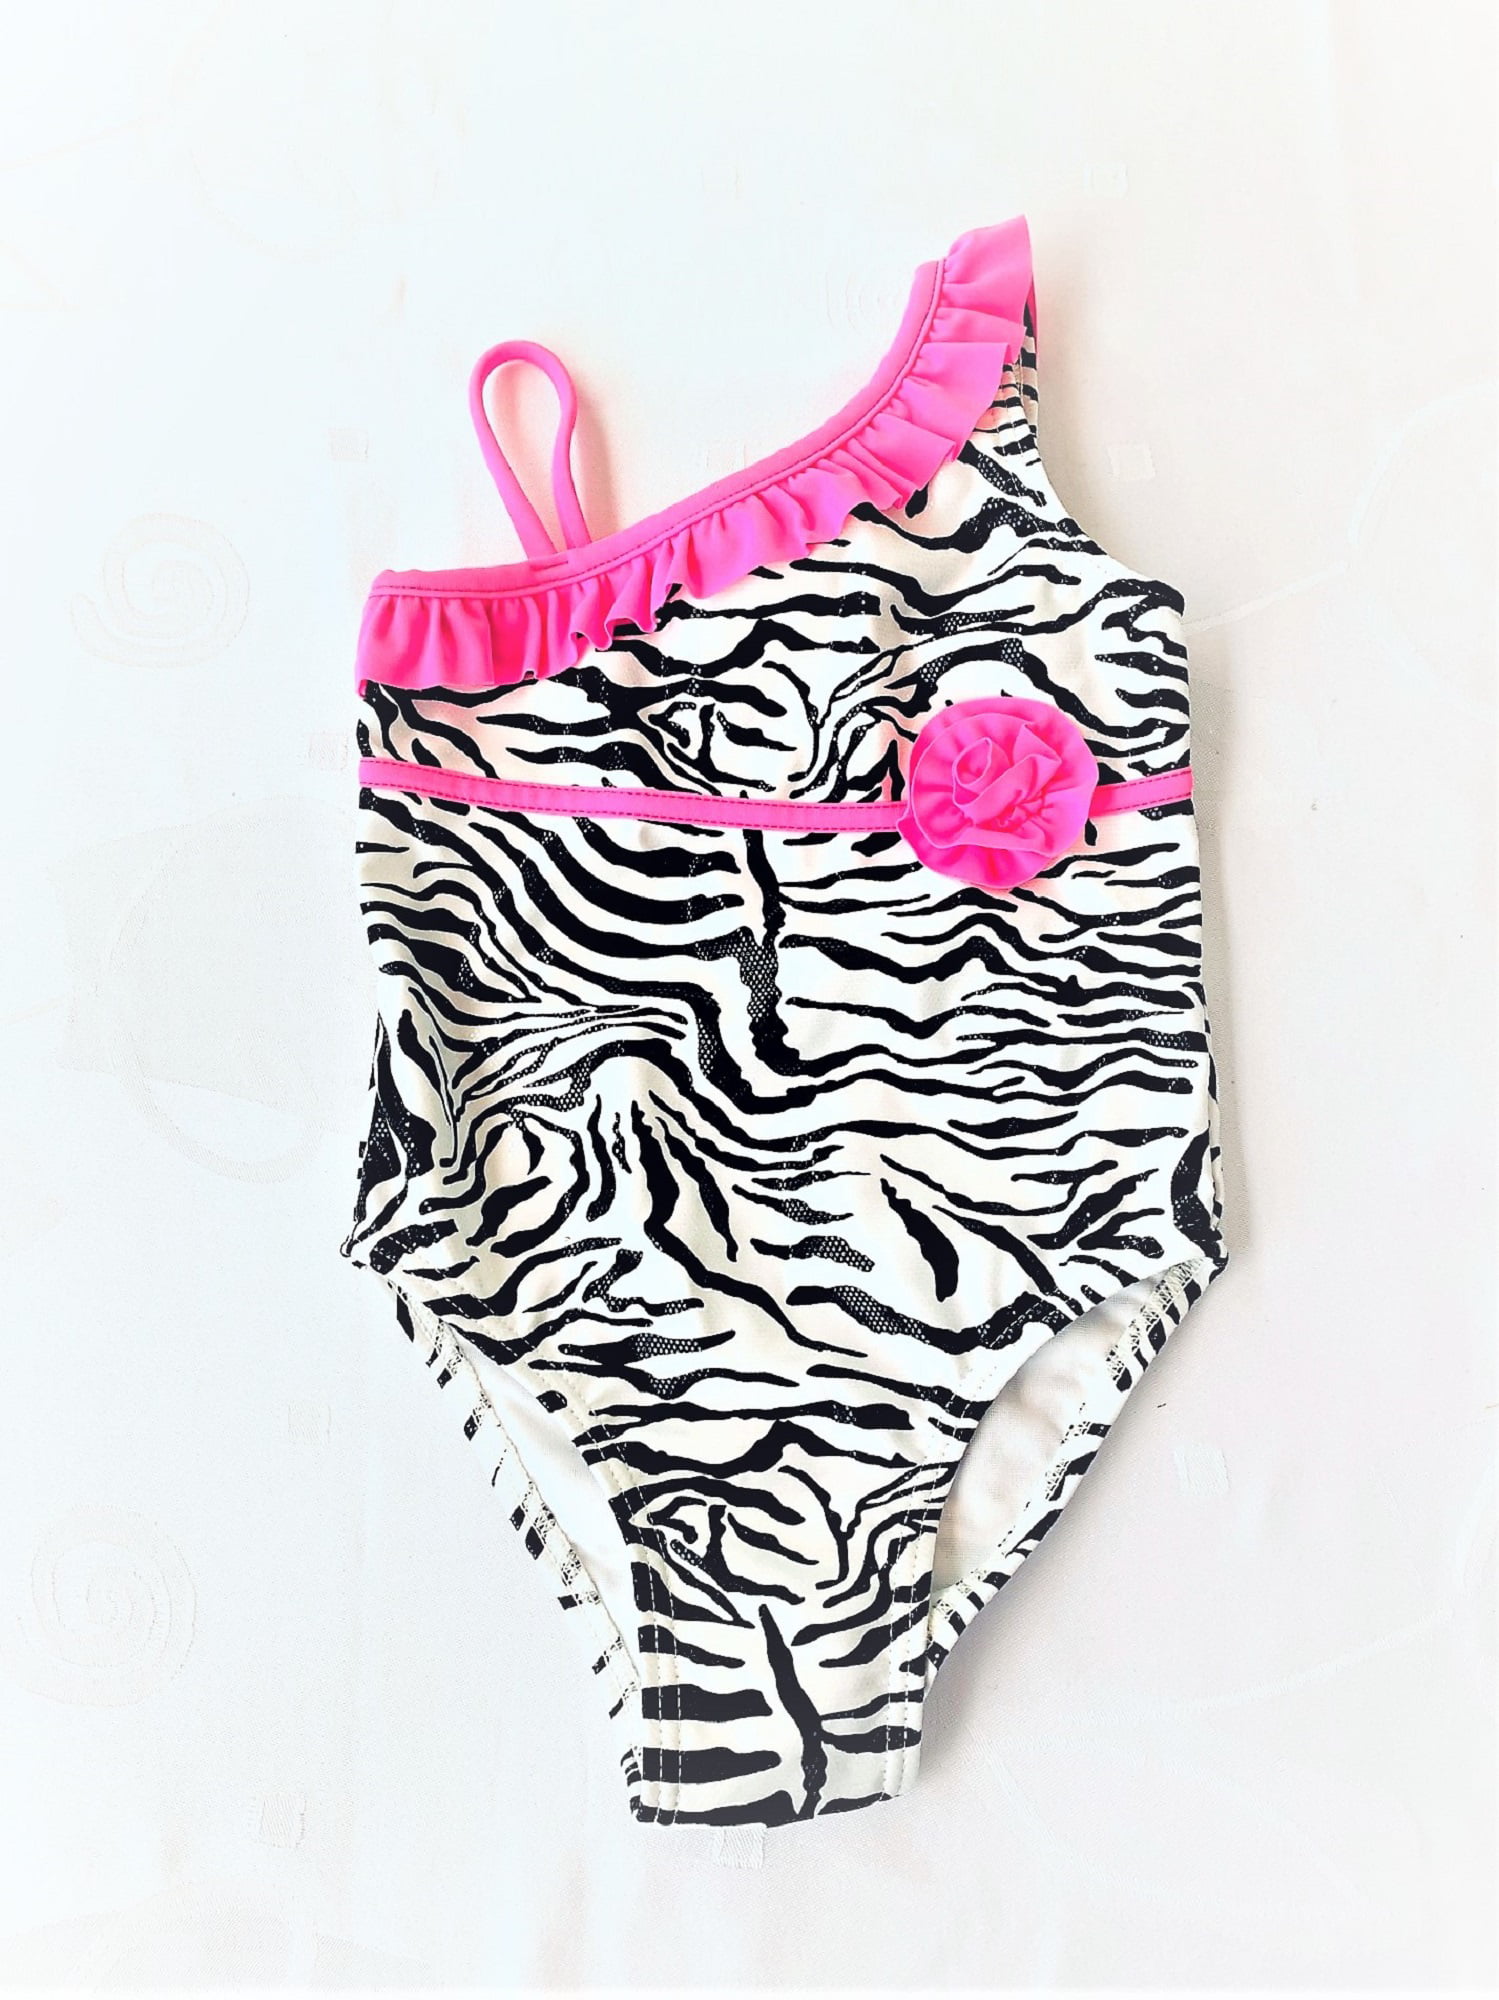 Flapdoodles Girls Pink Cool Zebra Swimsuit Age 7 Years Bnwt 